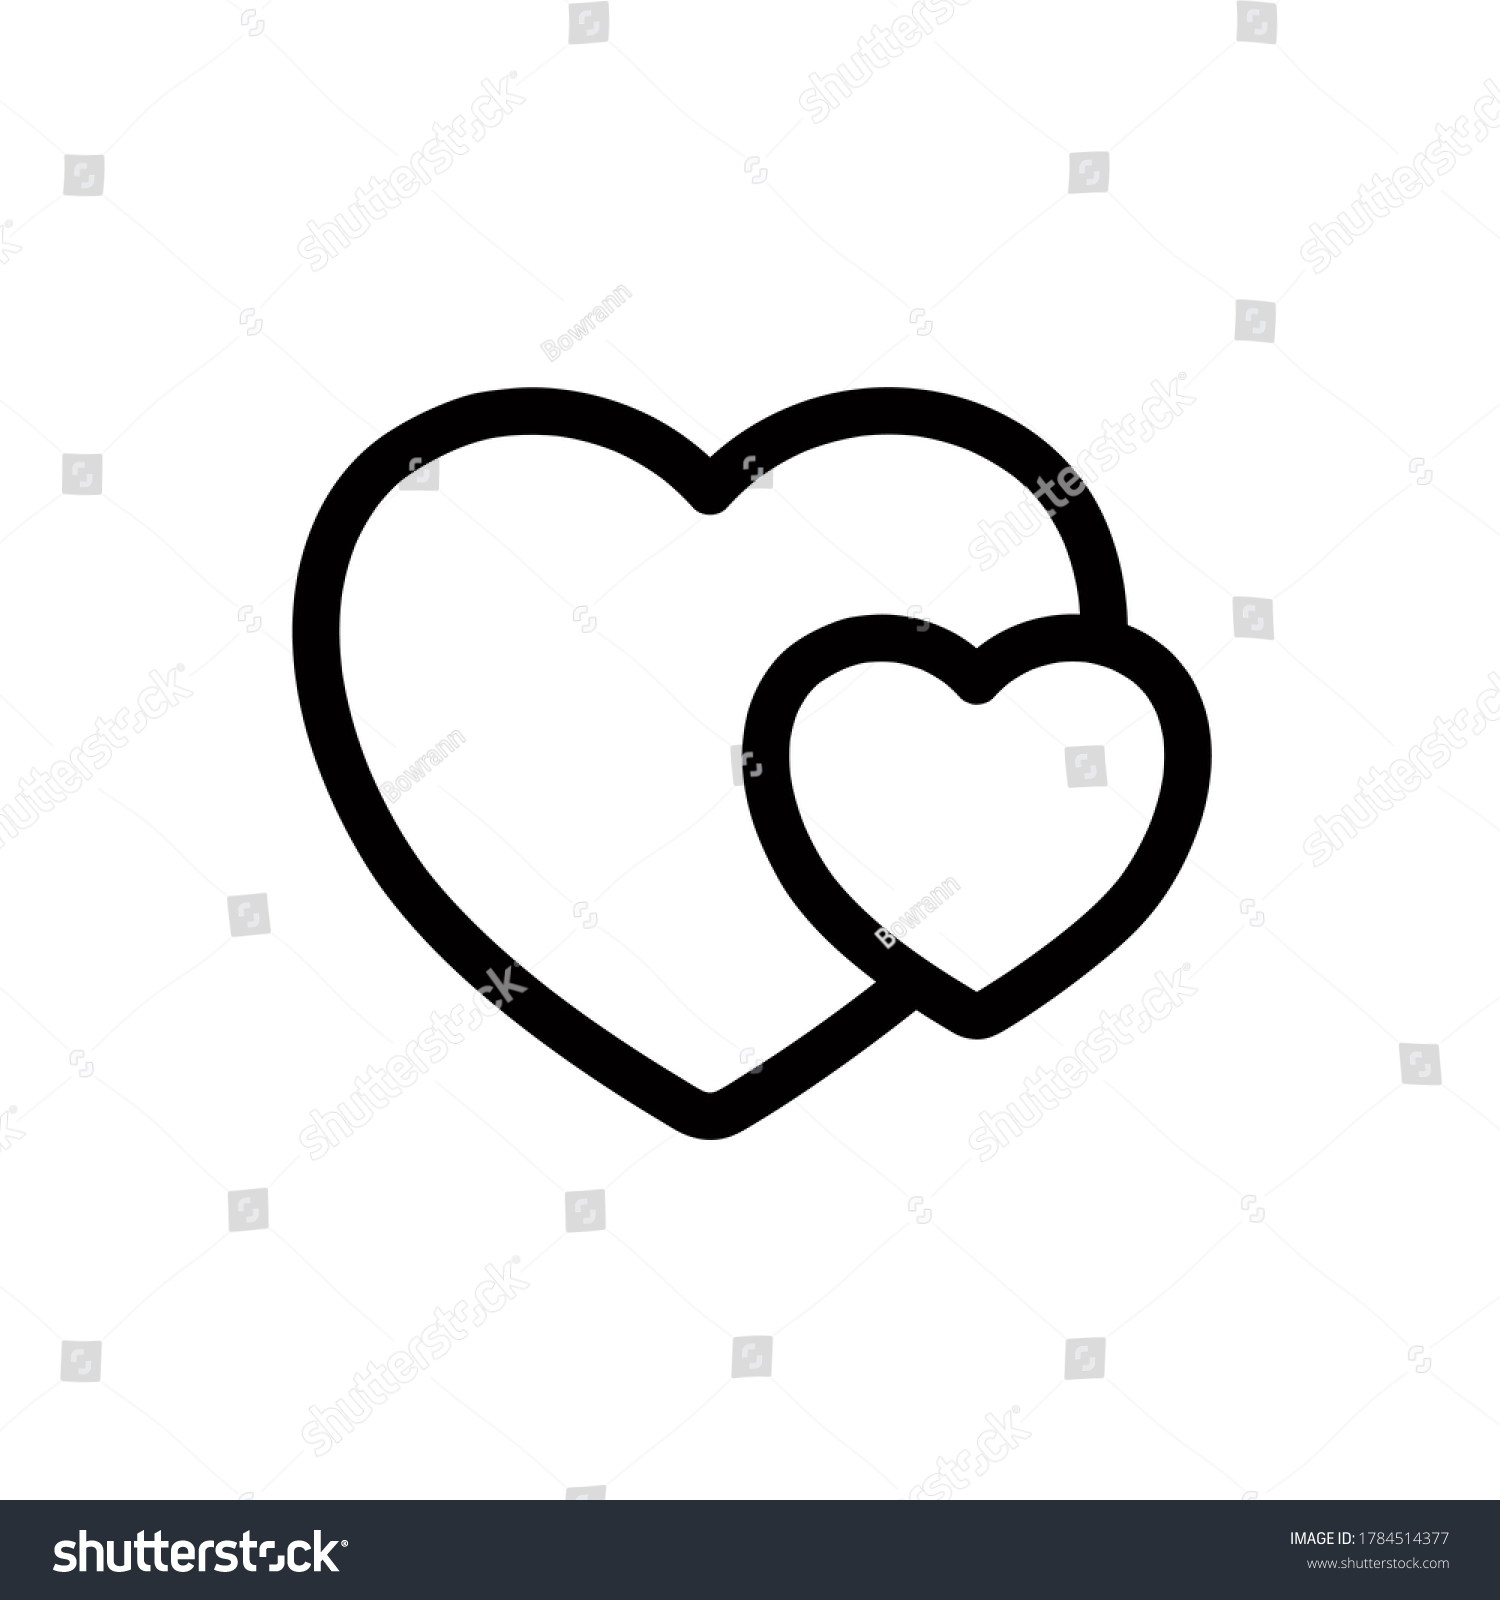 SVG of Two hearts icon,vector illustration. Flat design style. vector two hearts icon illustration isolated on White background, two hearts icon Eps10. two hearts icons graphic design vector symbols. svg